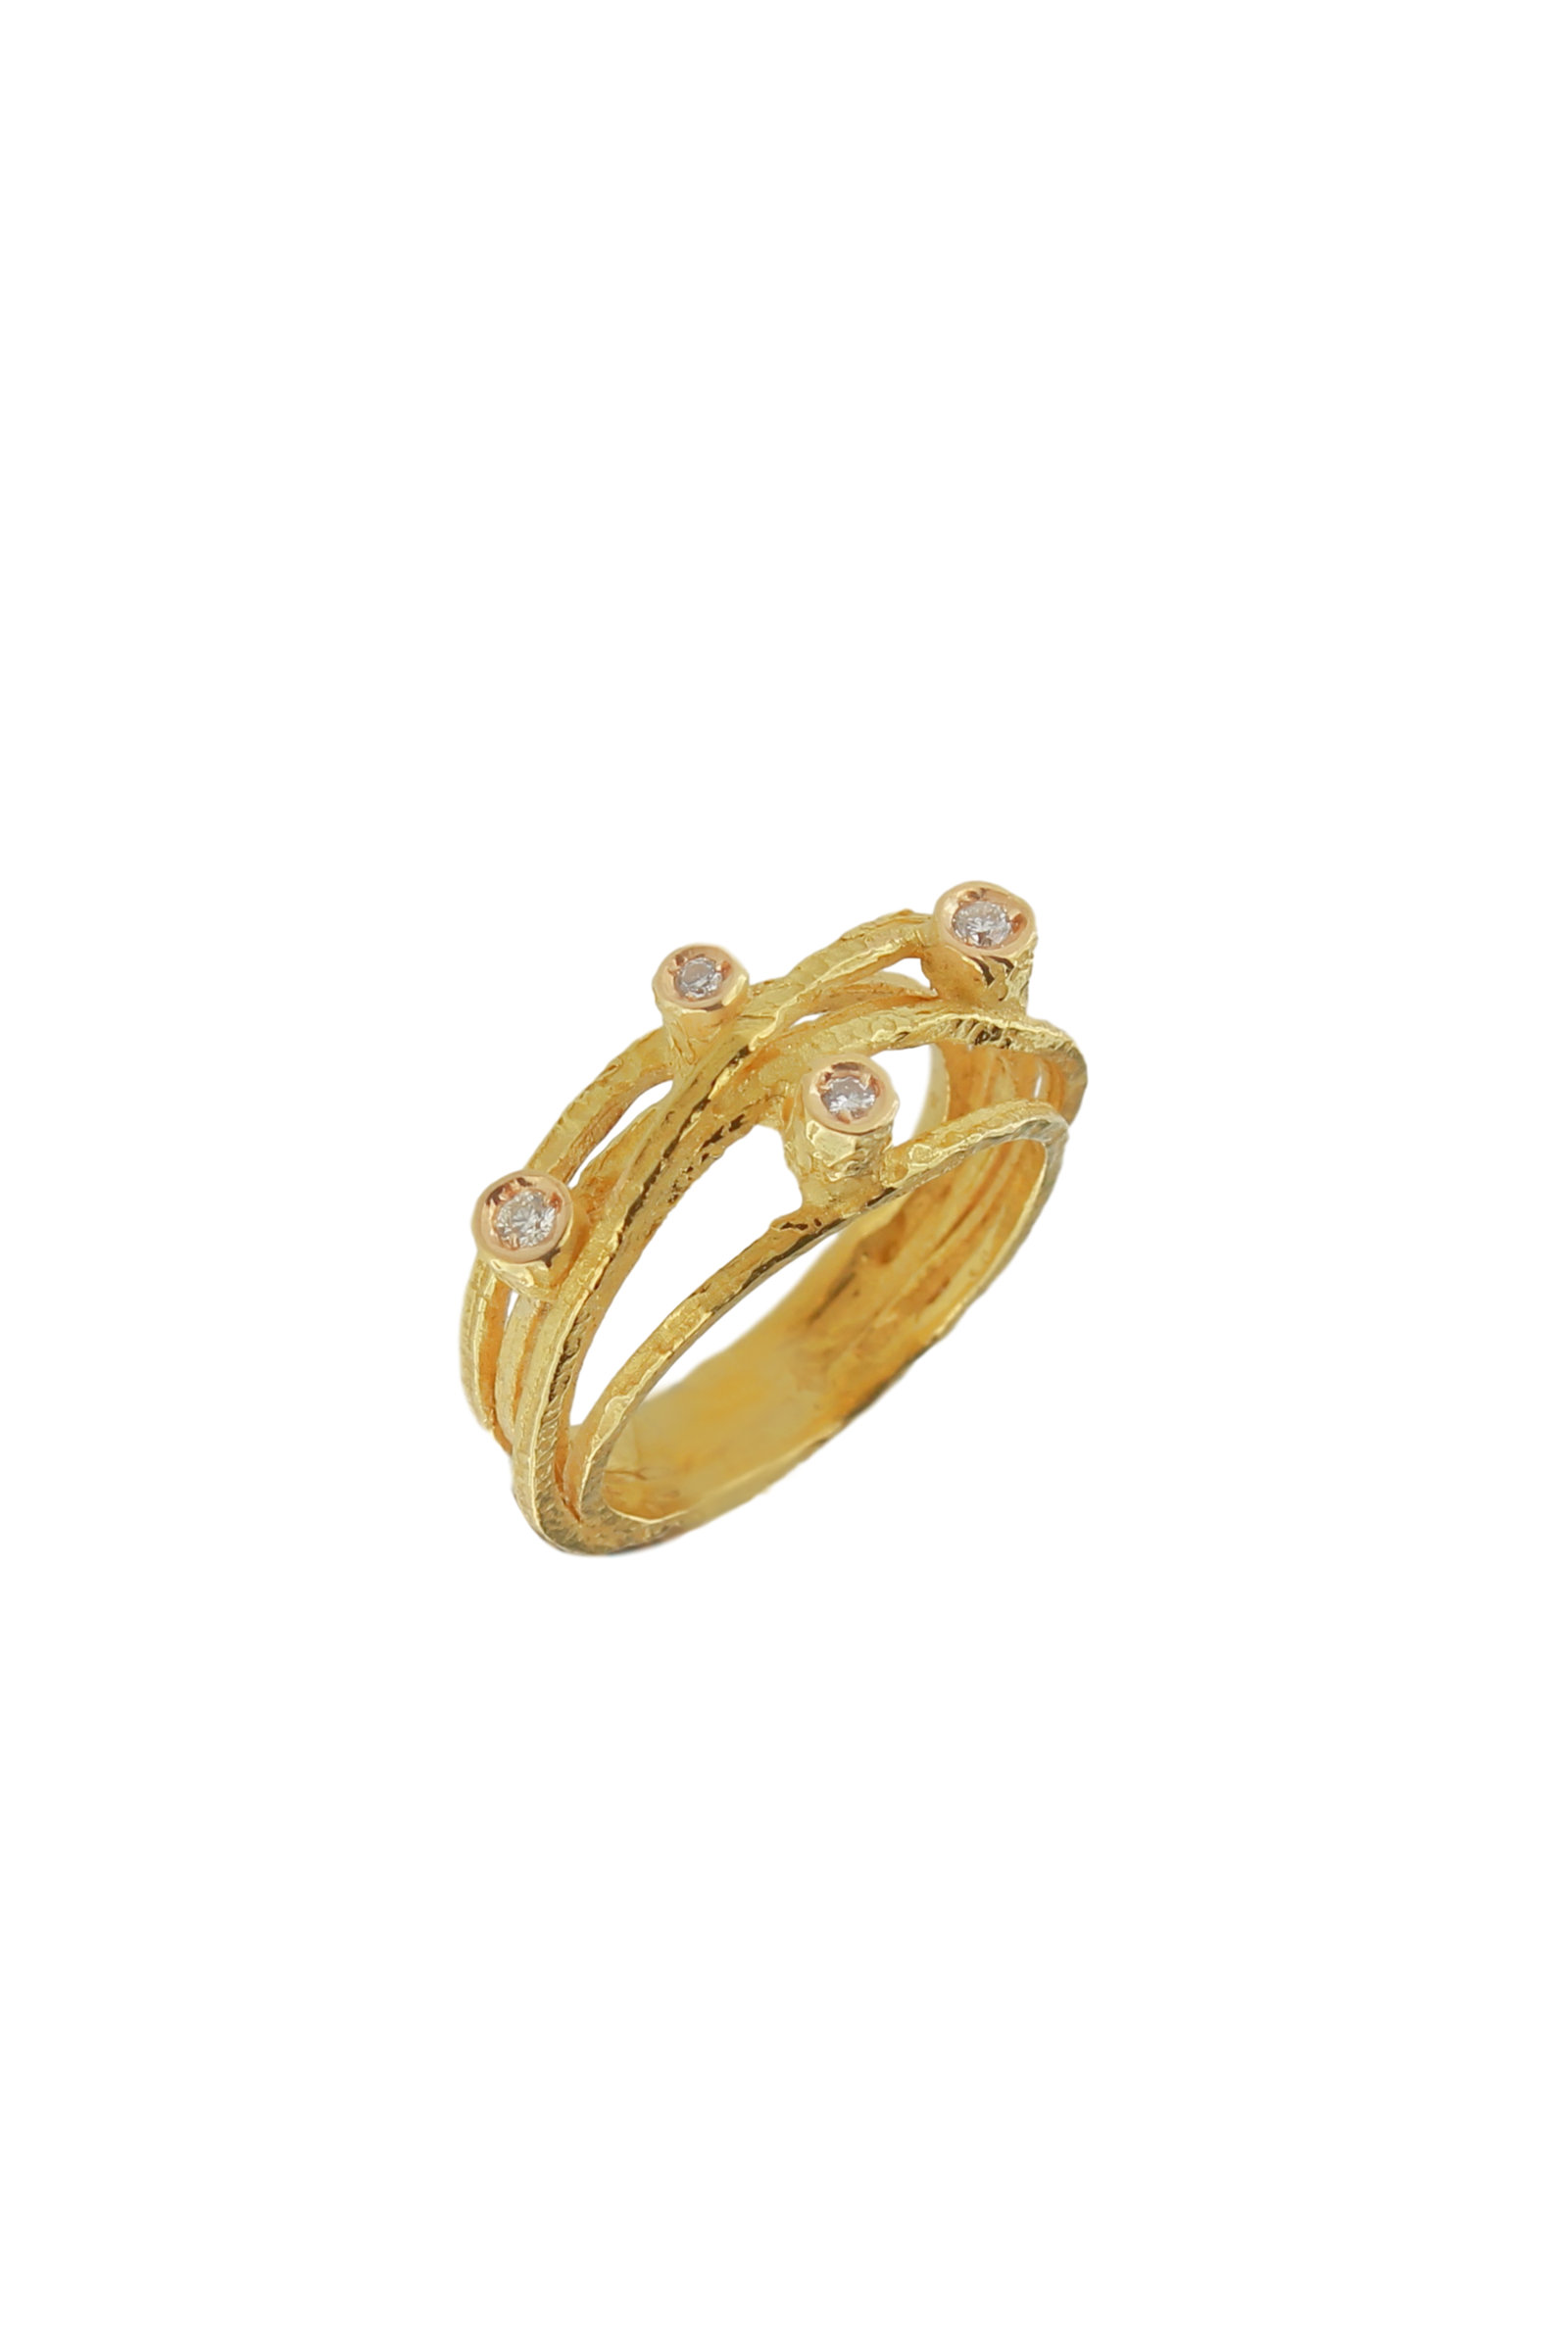 SE301BTA-18-Kt-Yellow-Gold-Wire-Ring-with-Diamonds-1